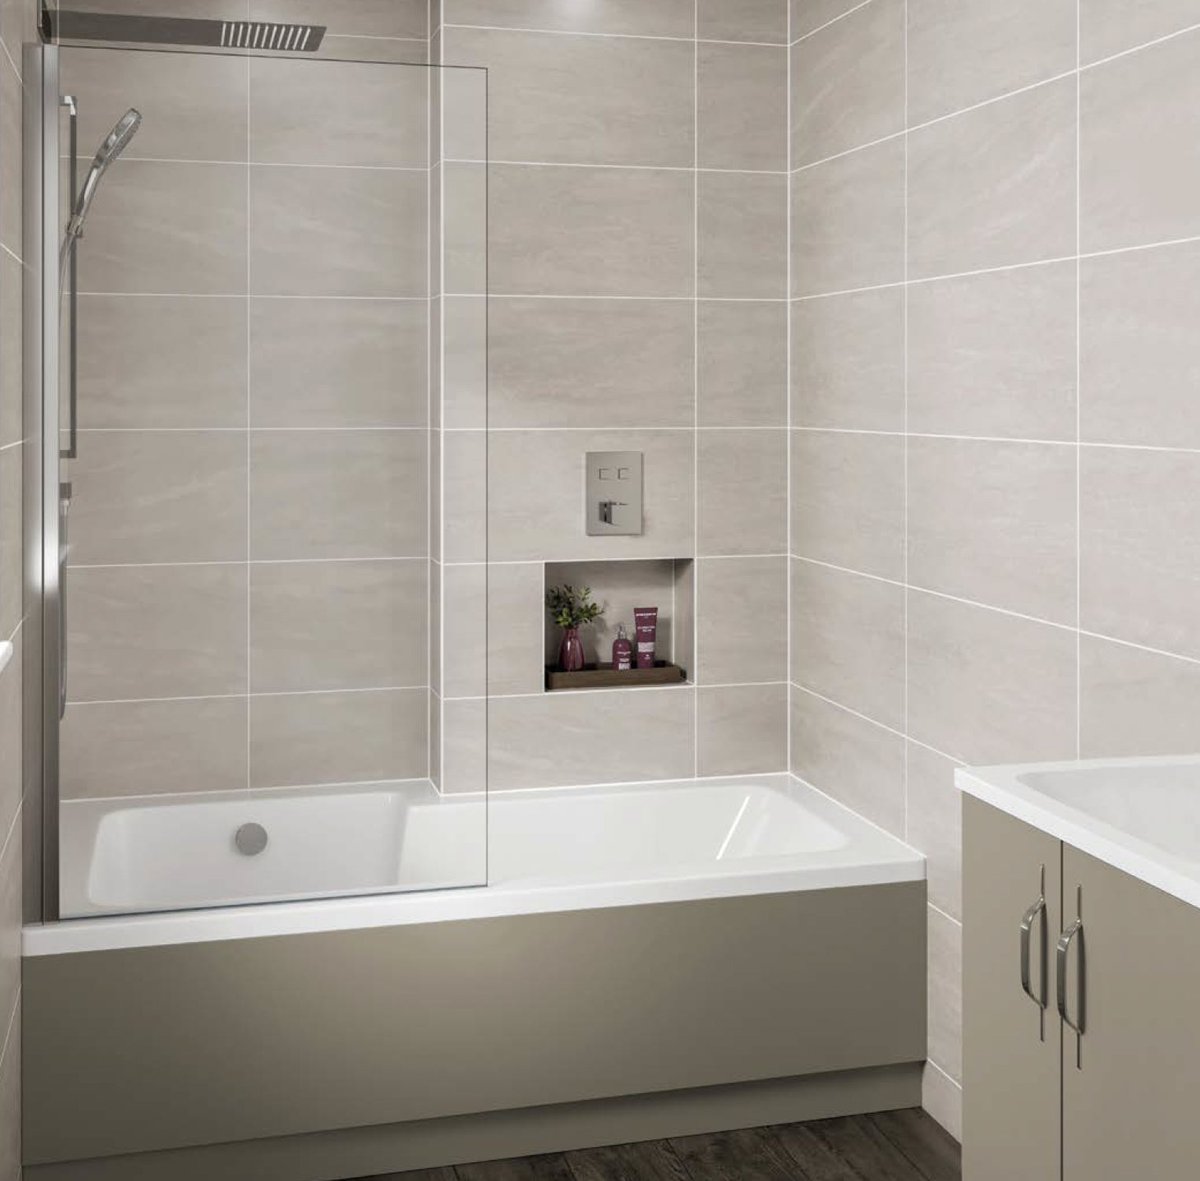 This L-shaped bath makes the most of the space in your bathroom 

#Bathroom #BathroomDesign #BathroomInspiration #ShowerScreen #ShowerEnclosure #BathroomSwansea #Shower #Bath